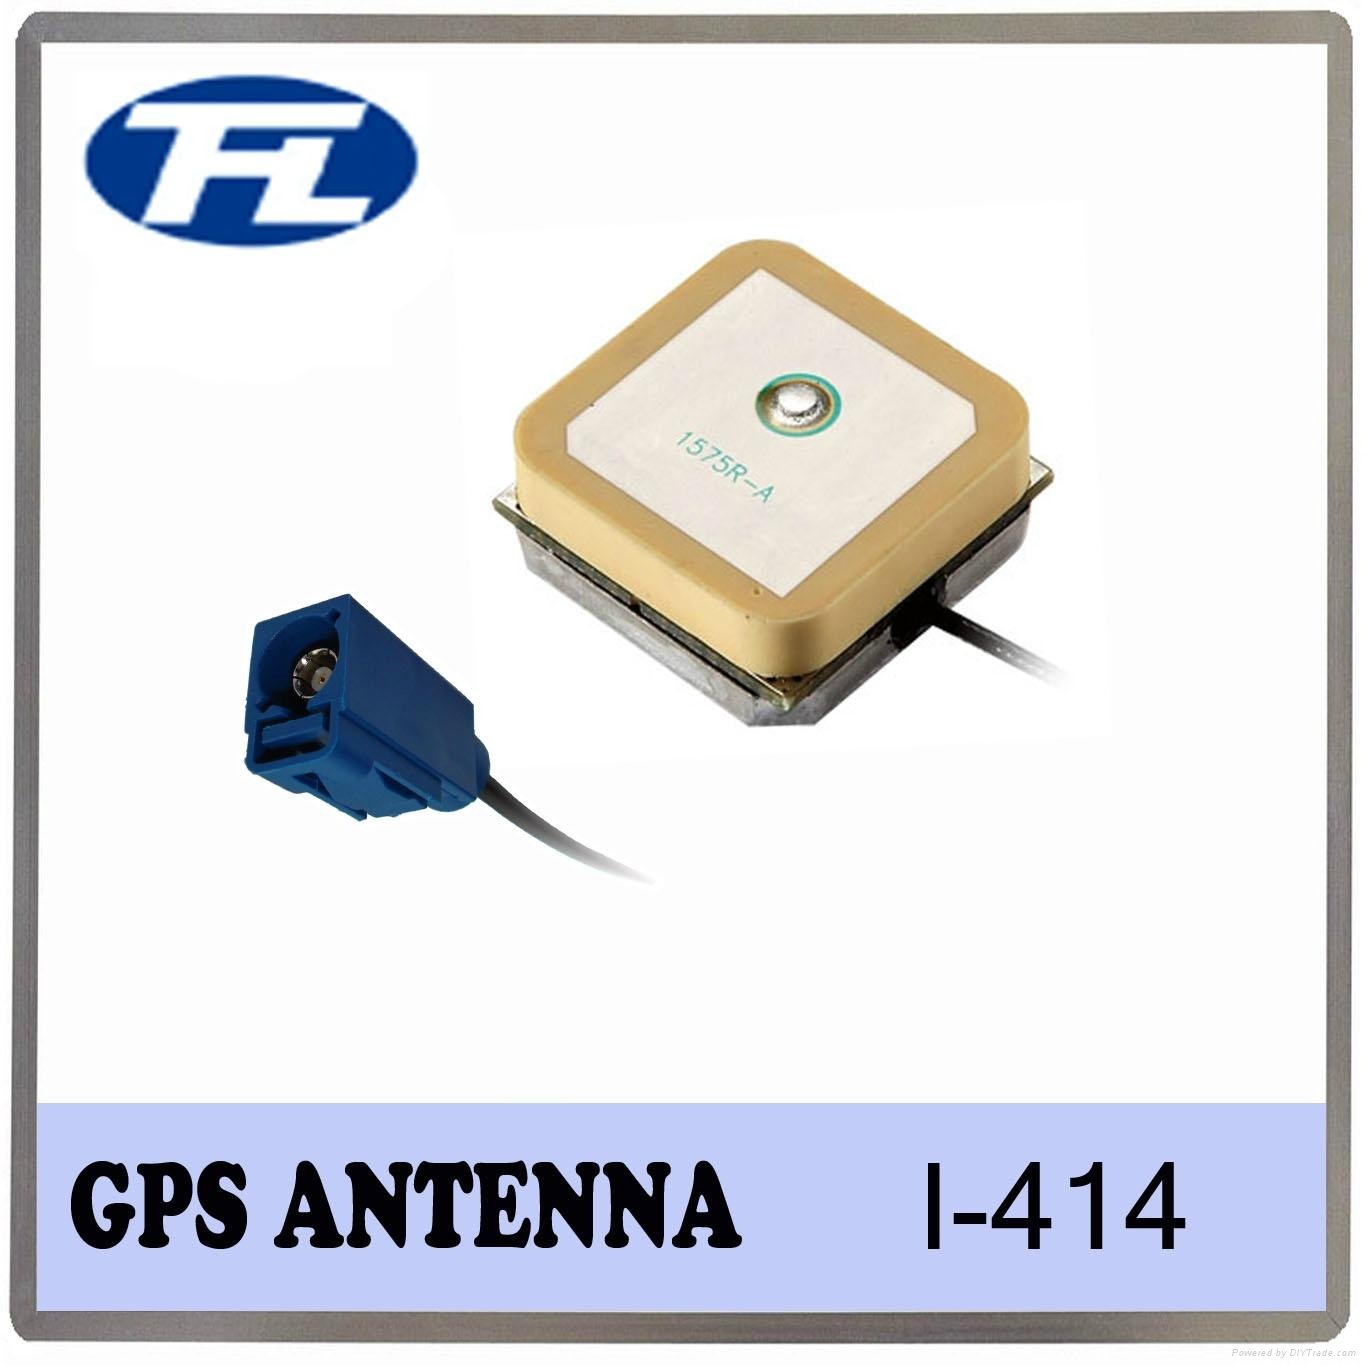 Embedded GPS Dielectric Antenna 3